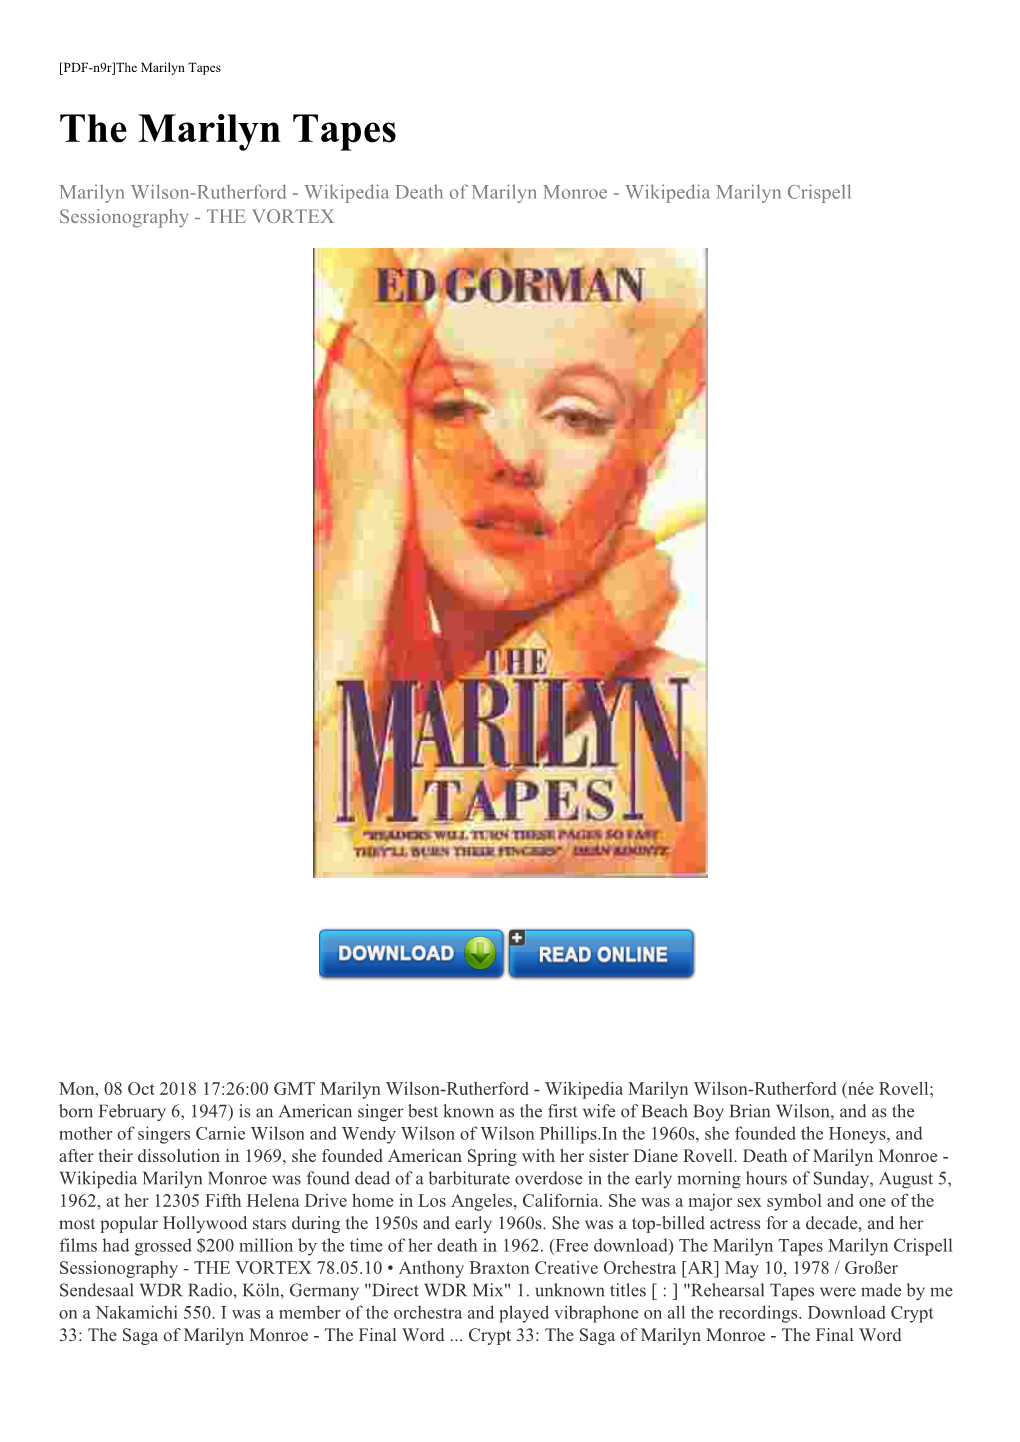 The Marilyn Tapes the Marilyn Tapes